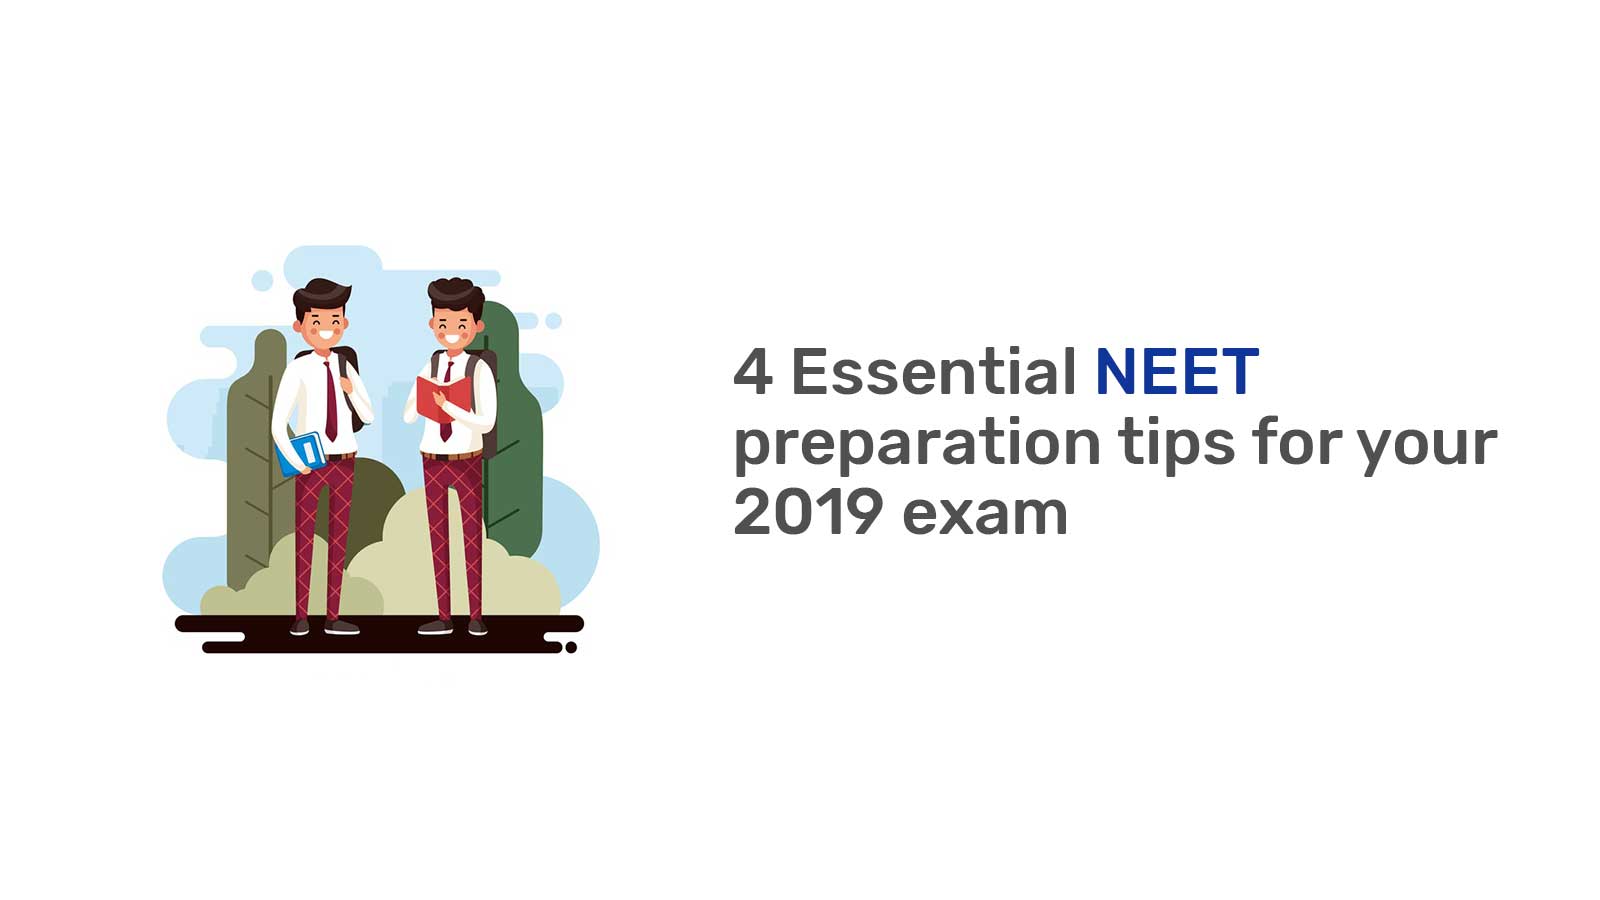 What is the Daily Timetable of NEET Aspirants?